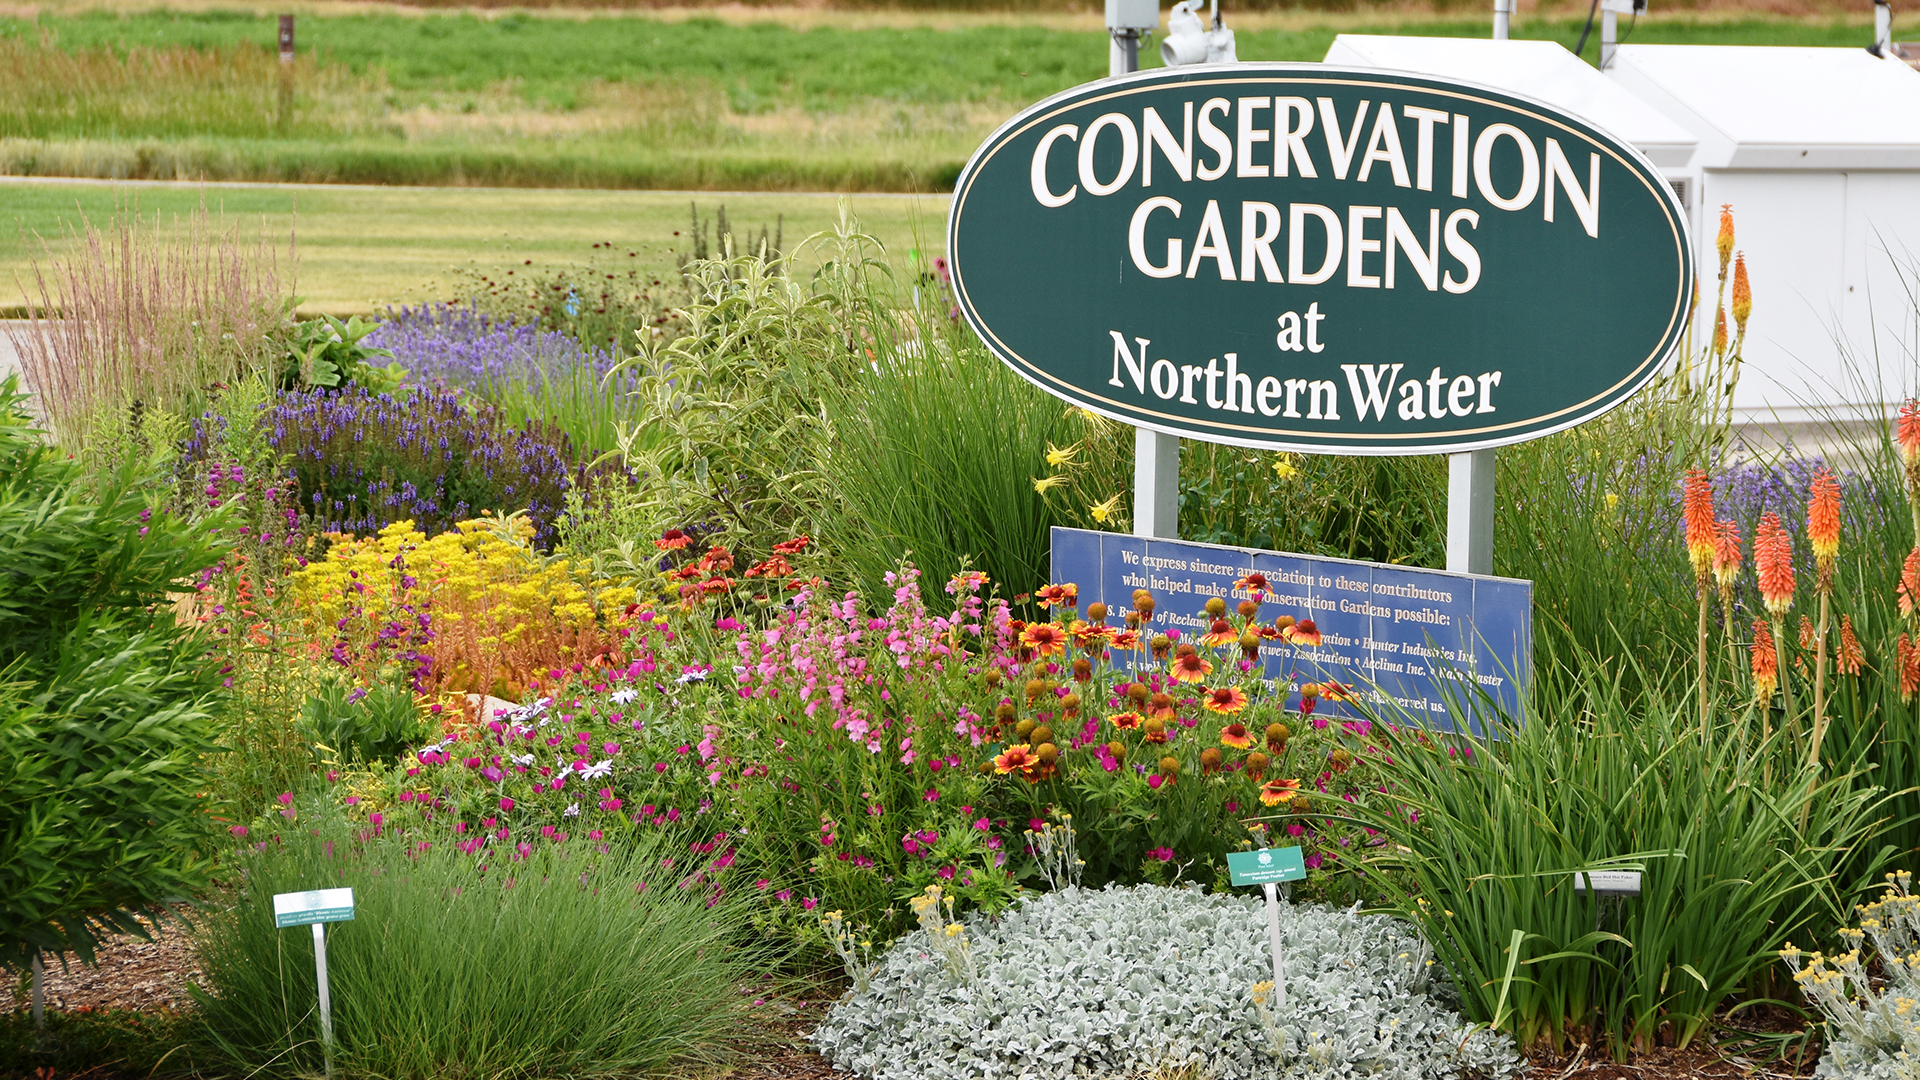 Conservation Gardens in bloom at Northern Water headquarters.